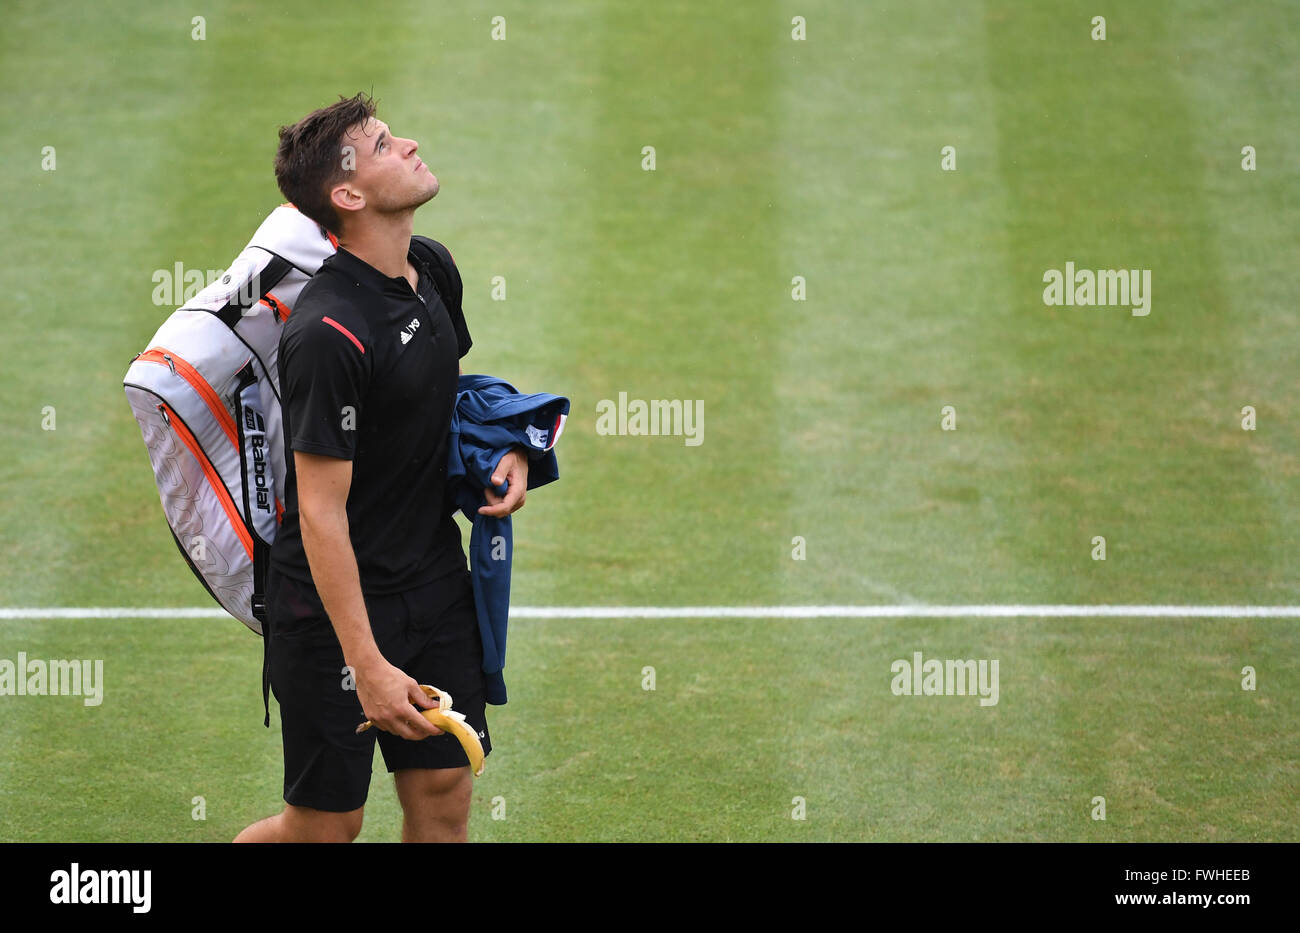 Dominic Thiem of Austria looks up to the sky as he walks off the pitch during a rain break in his final match against Philipp Kohlschreiber of Germany at the ATP tennis tournament in Stuttgart, Germany, 12 June 2016. Photo: MARIJAN MURAT/dpa Stock Photo